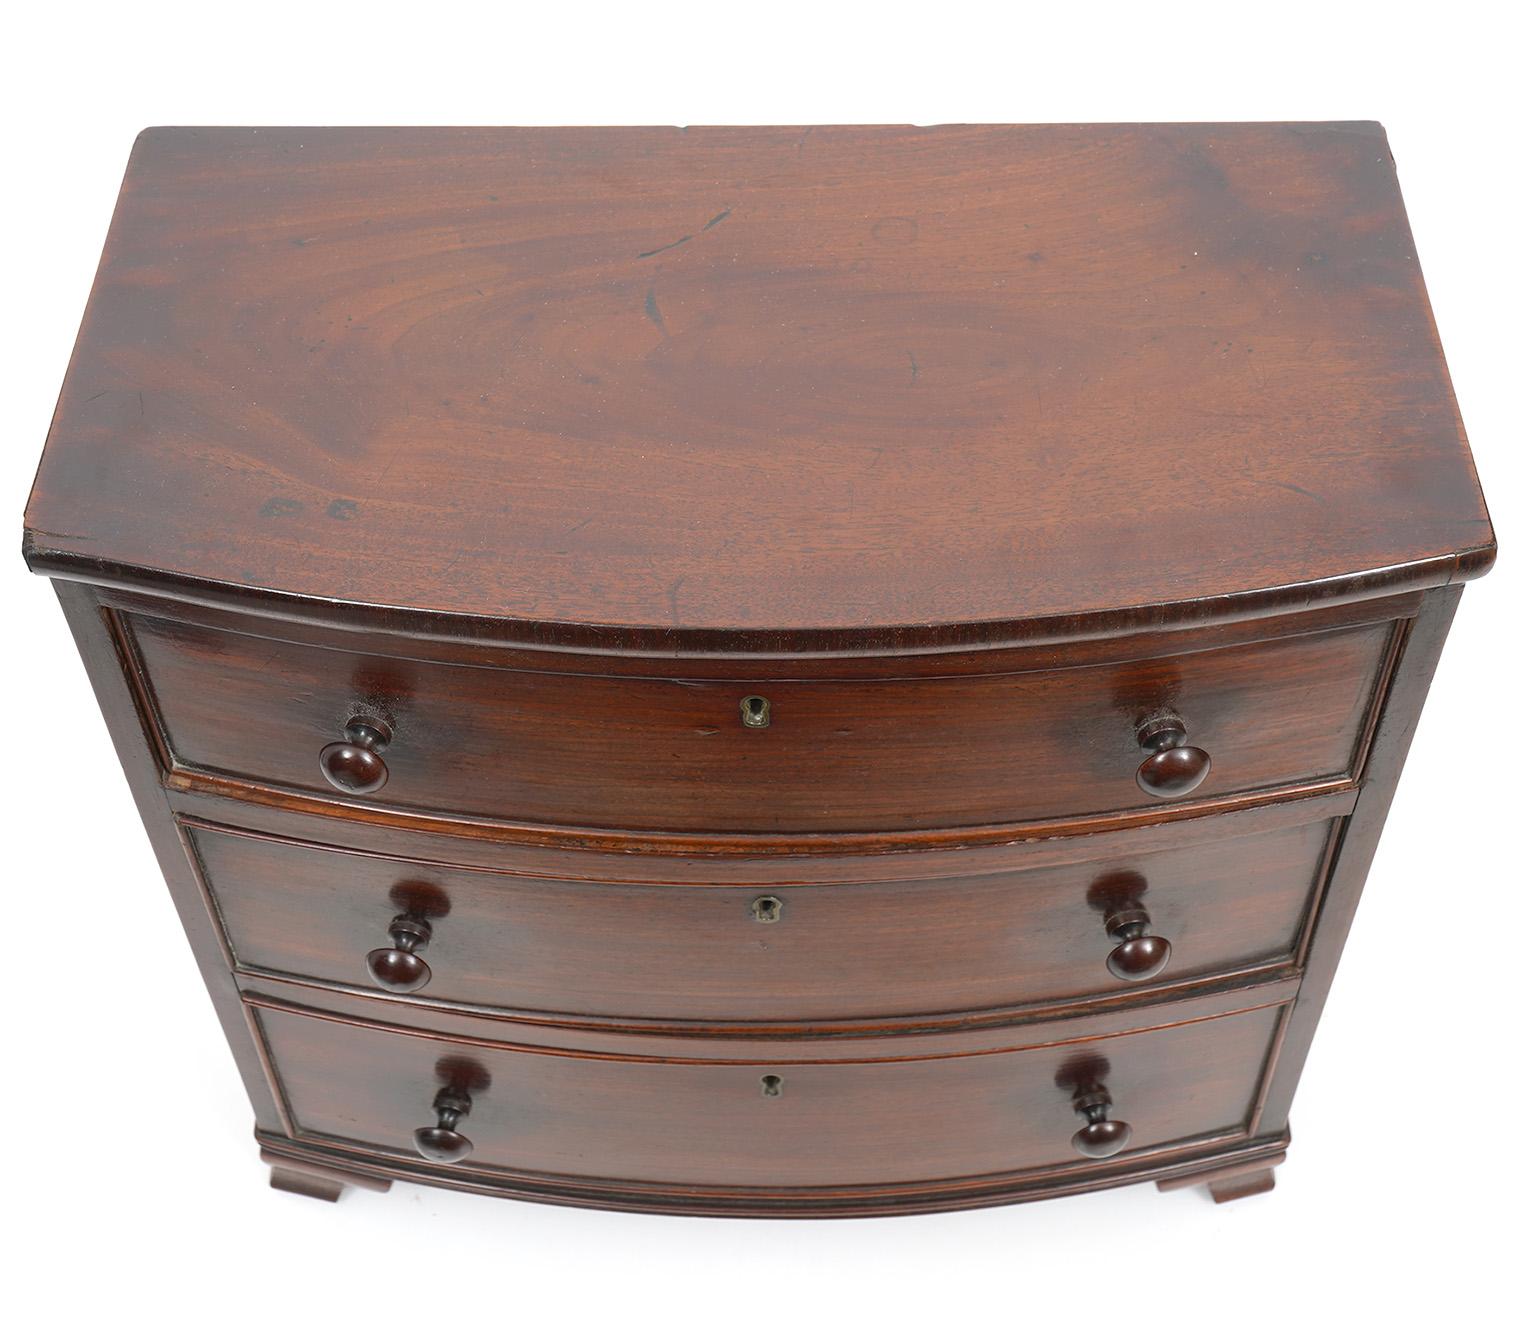 Antique Miniature Commode. English, Mahogany, Bow Front, circa 1820's in a Hepplewhite Style. 14.5